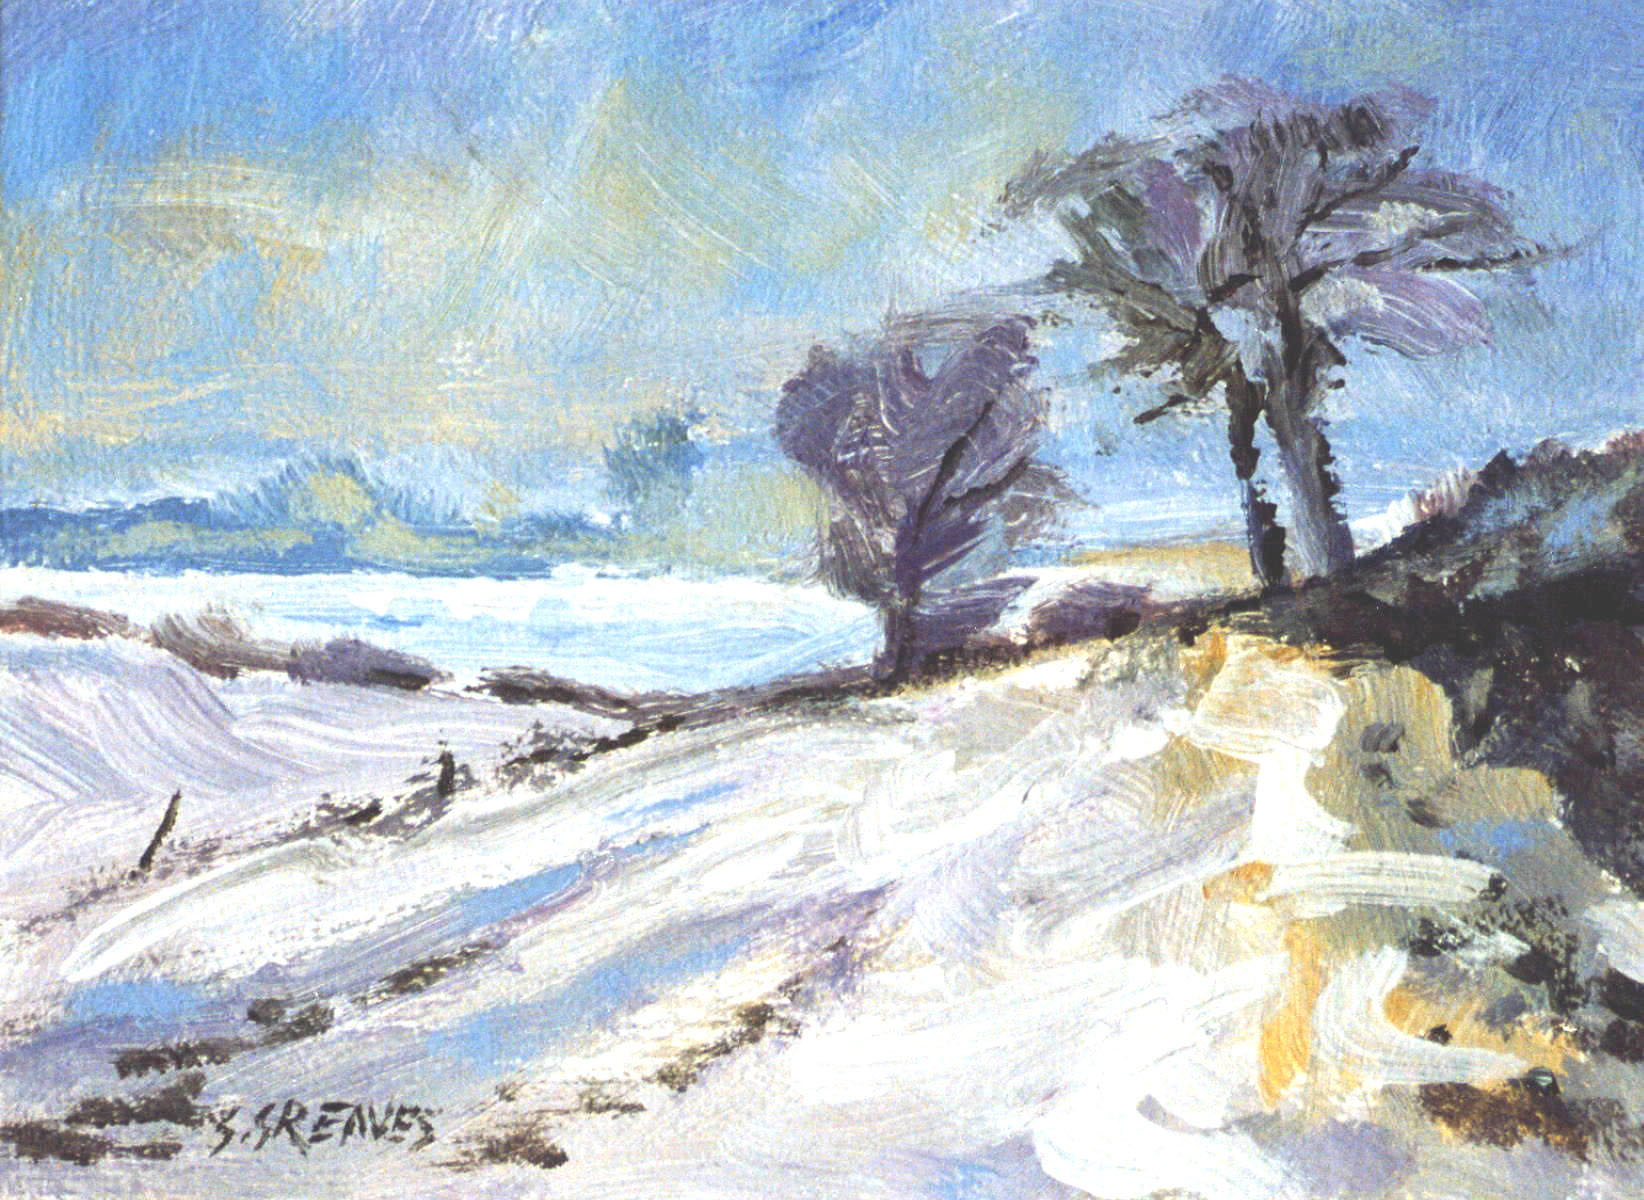 Steve Greaves -  Wentworth Winter - landscape painting in acrylic